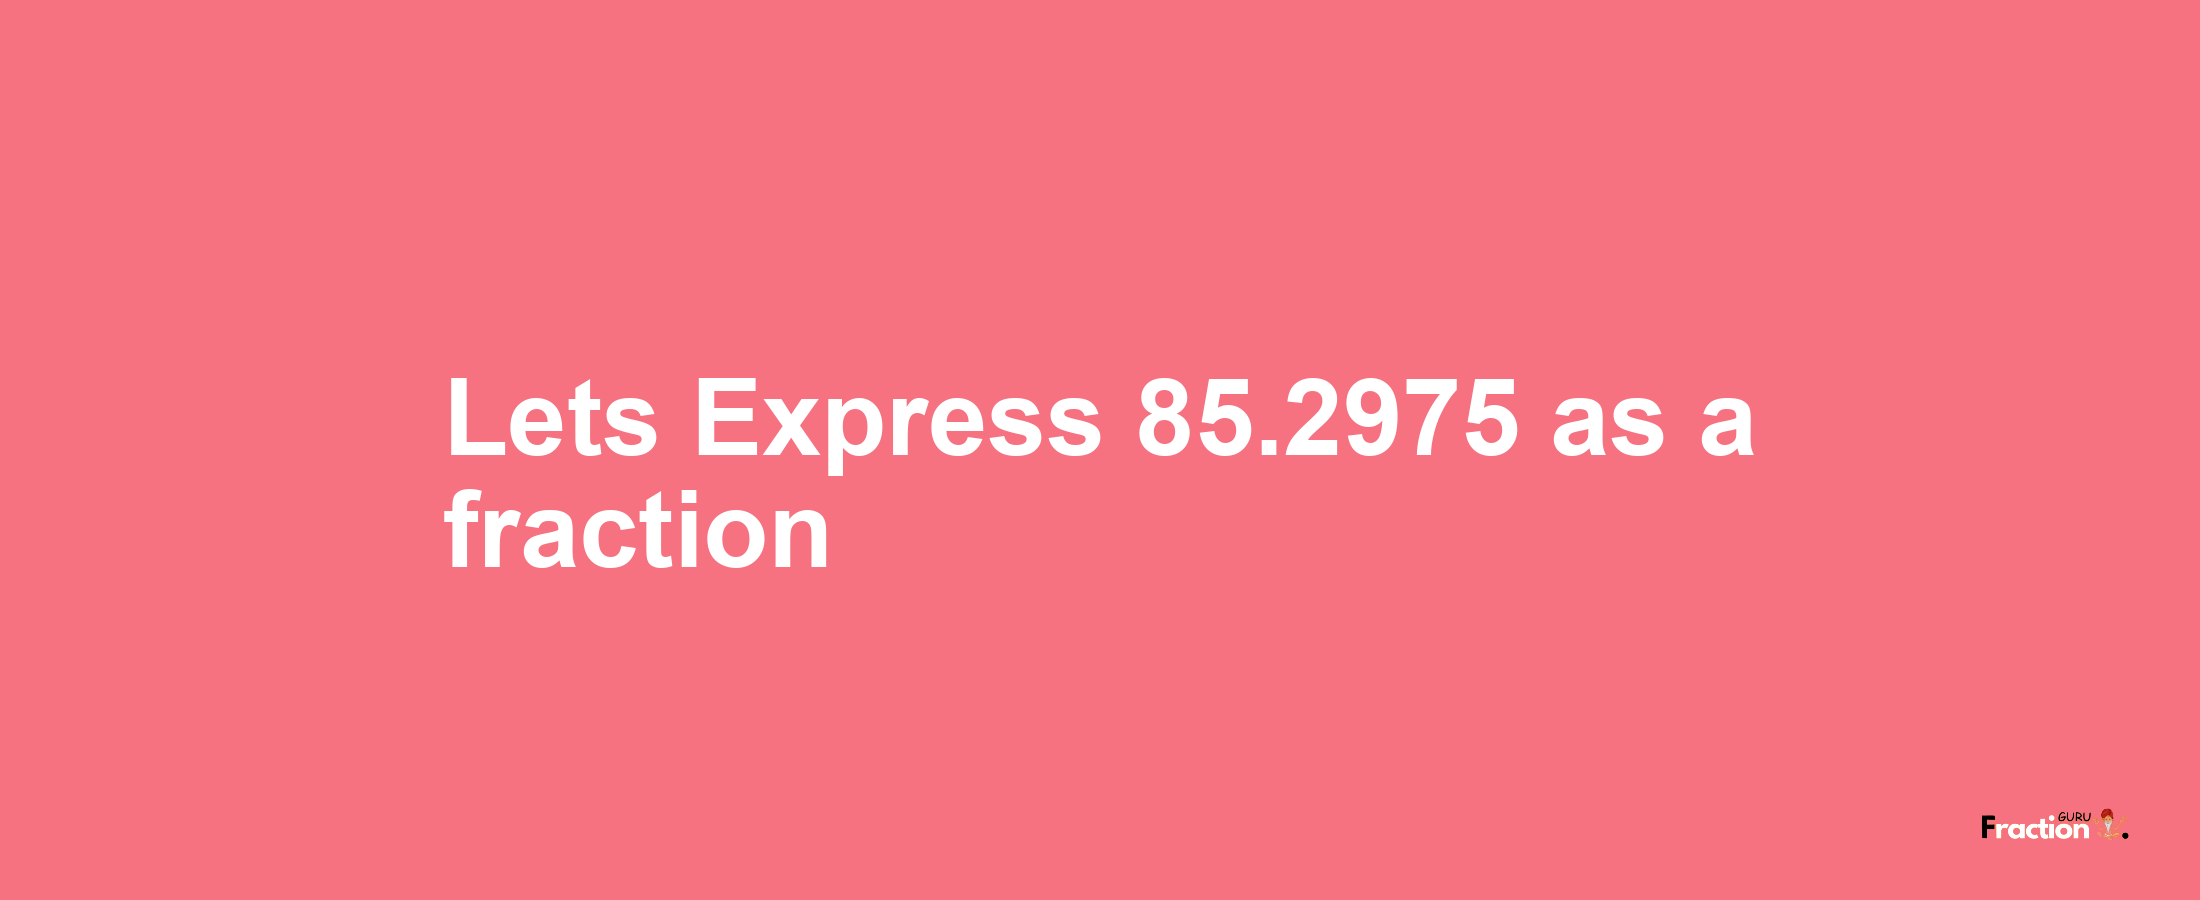 Lets Express 85.2975 as afraction